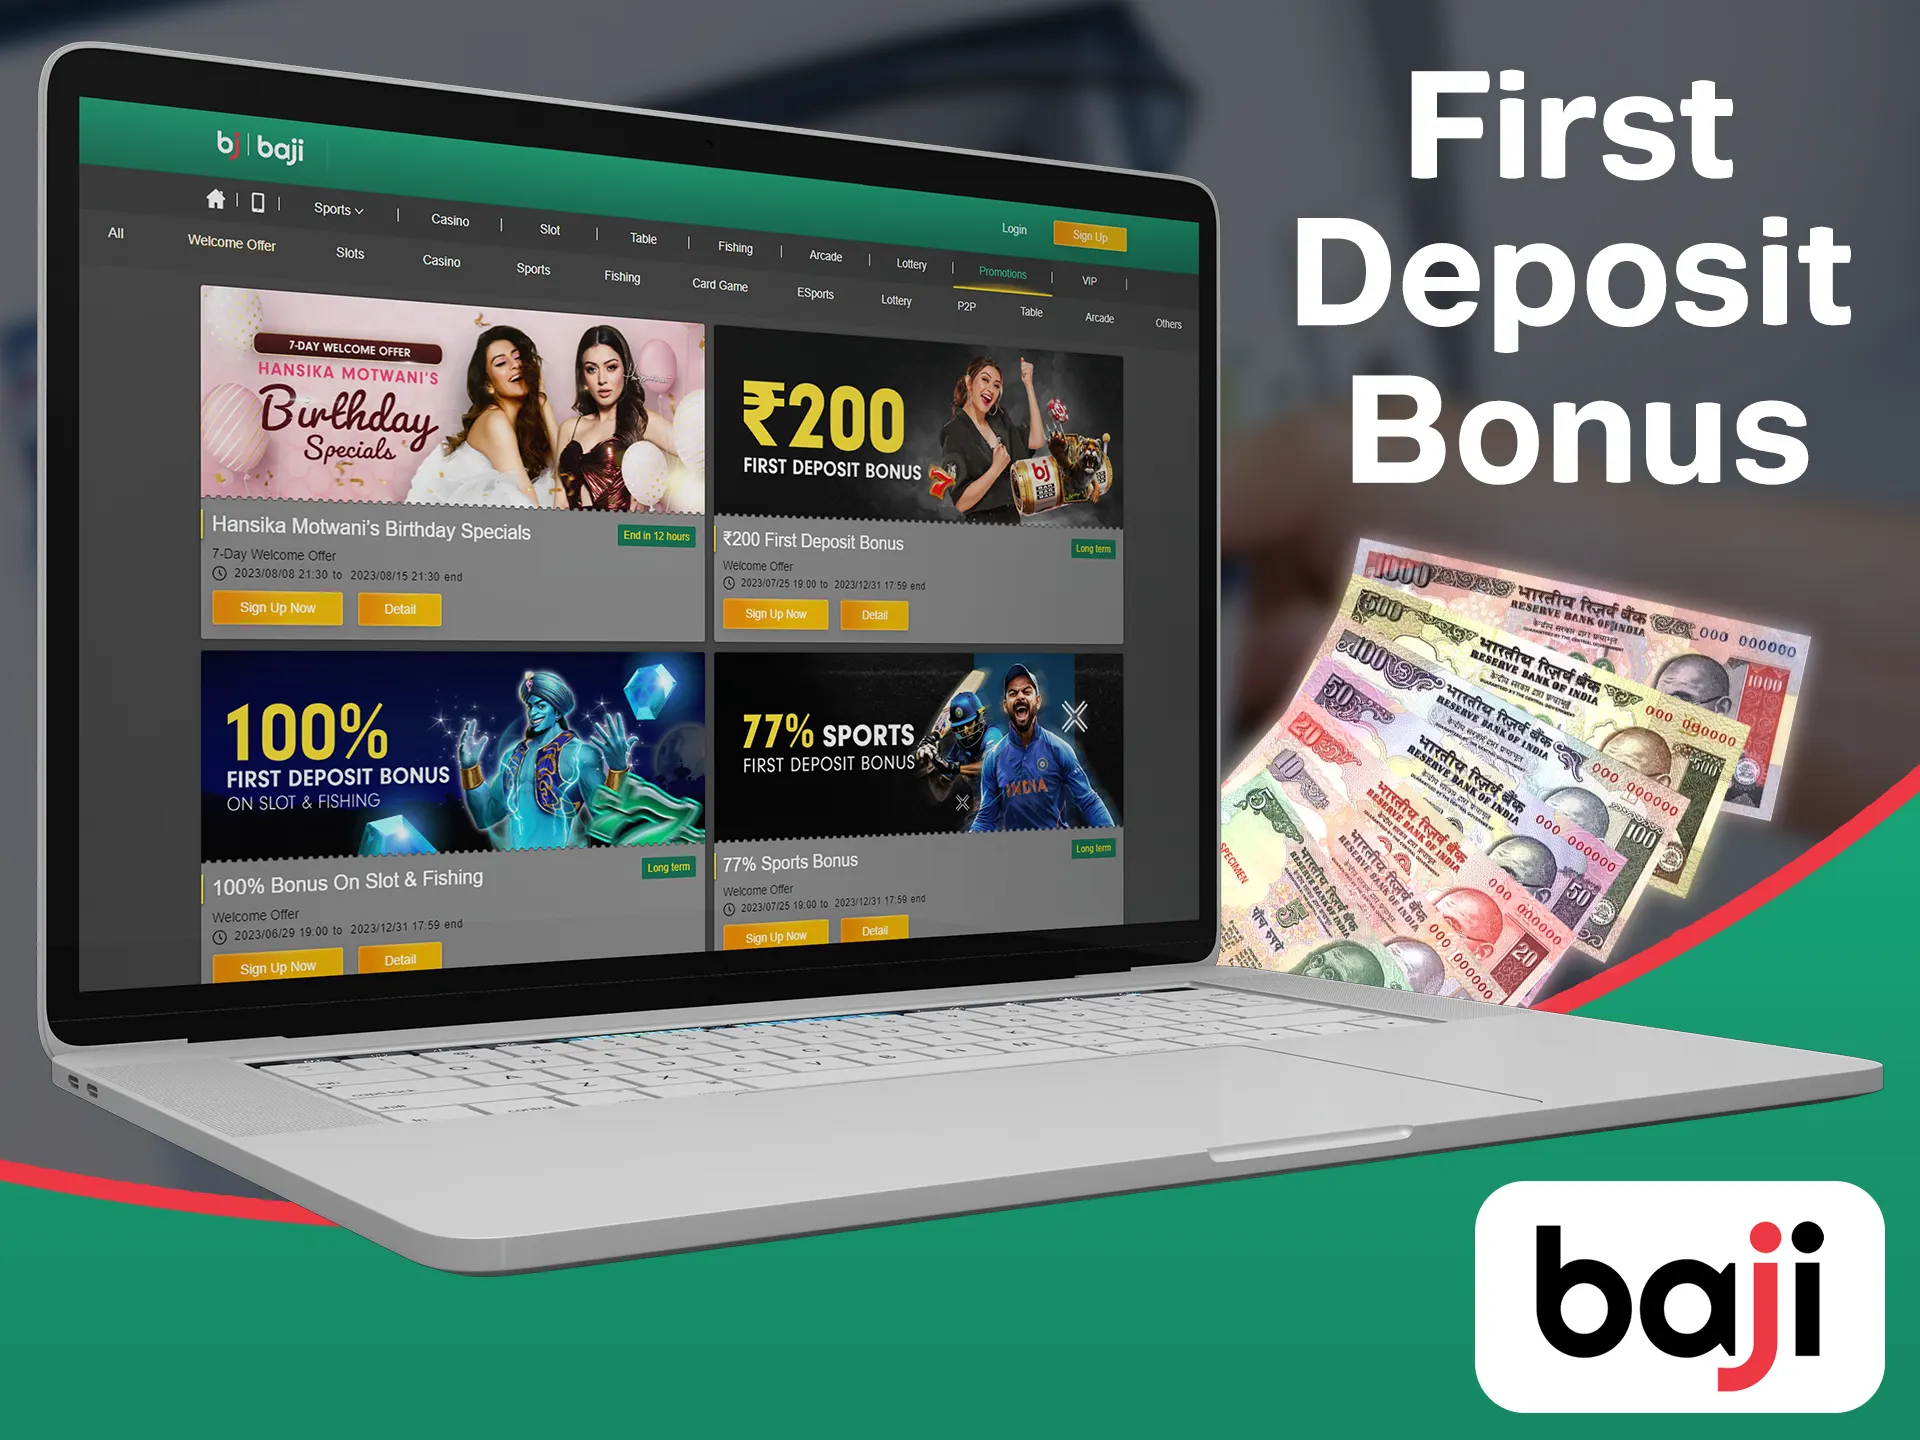 Make the first deposit and get a bonus at the Baji.